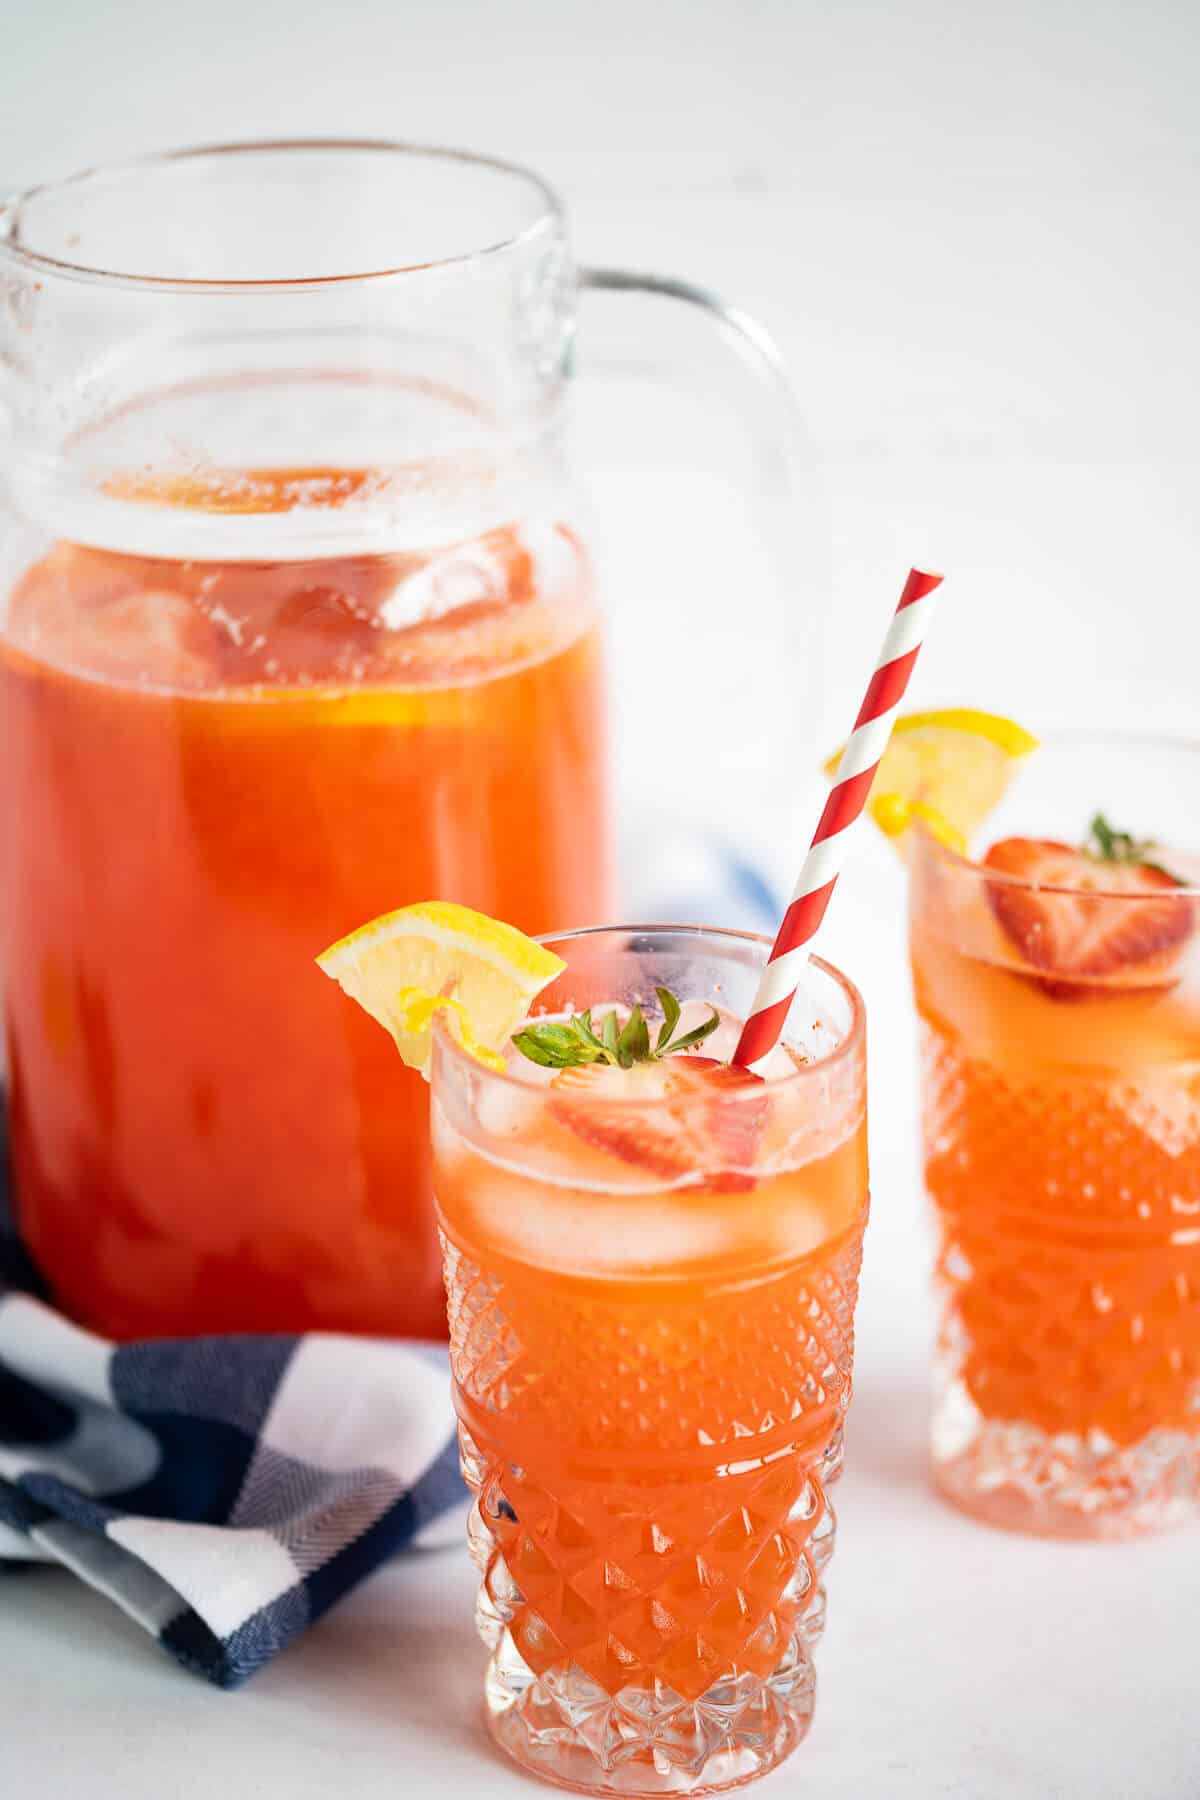 A glass of strawberry lemonade garnished with a fresh strawberry and lemon wedge. Behind the glass is another glass and a pitcher of the lemonade.